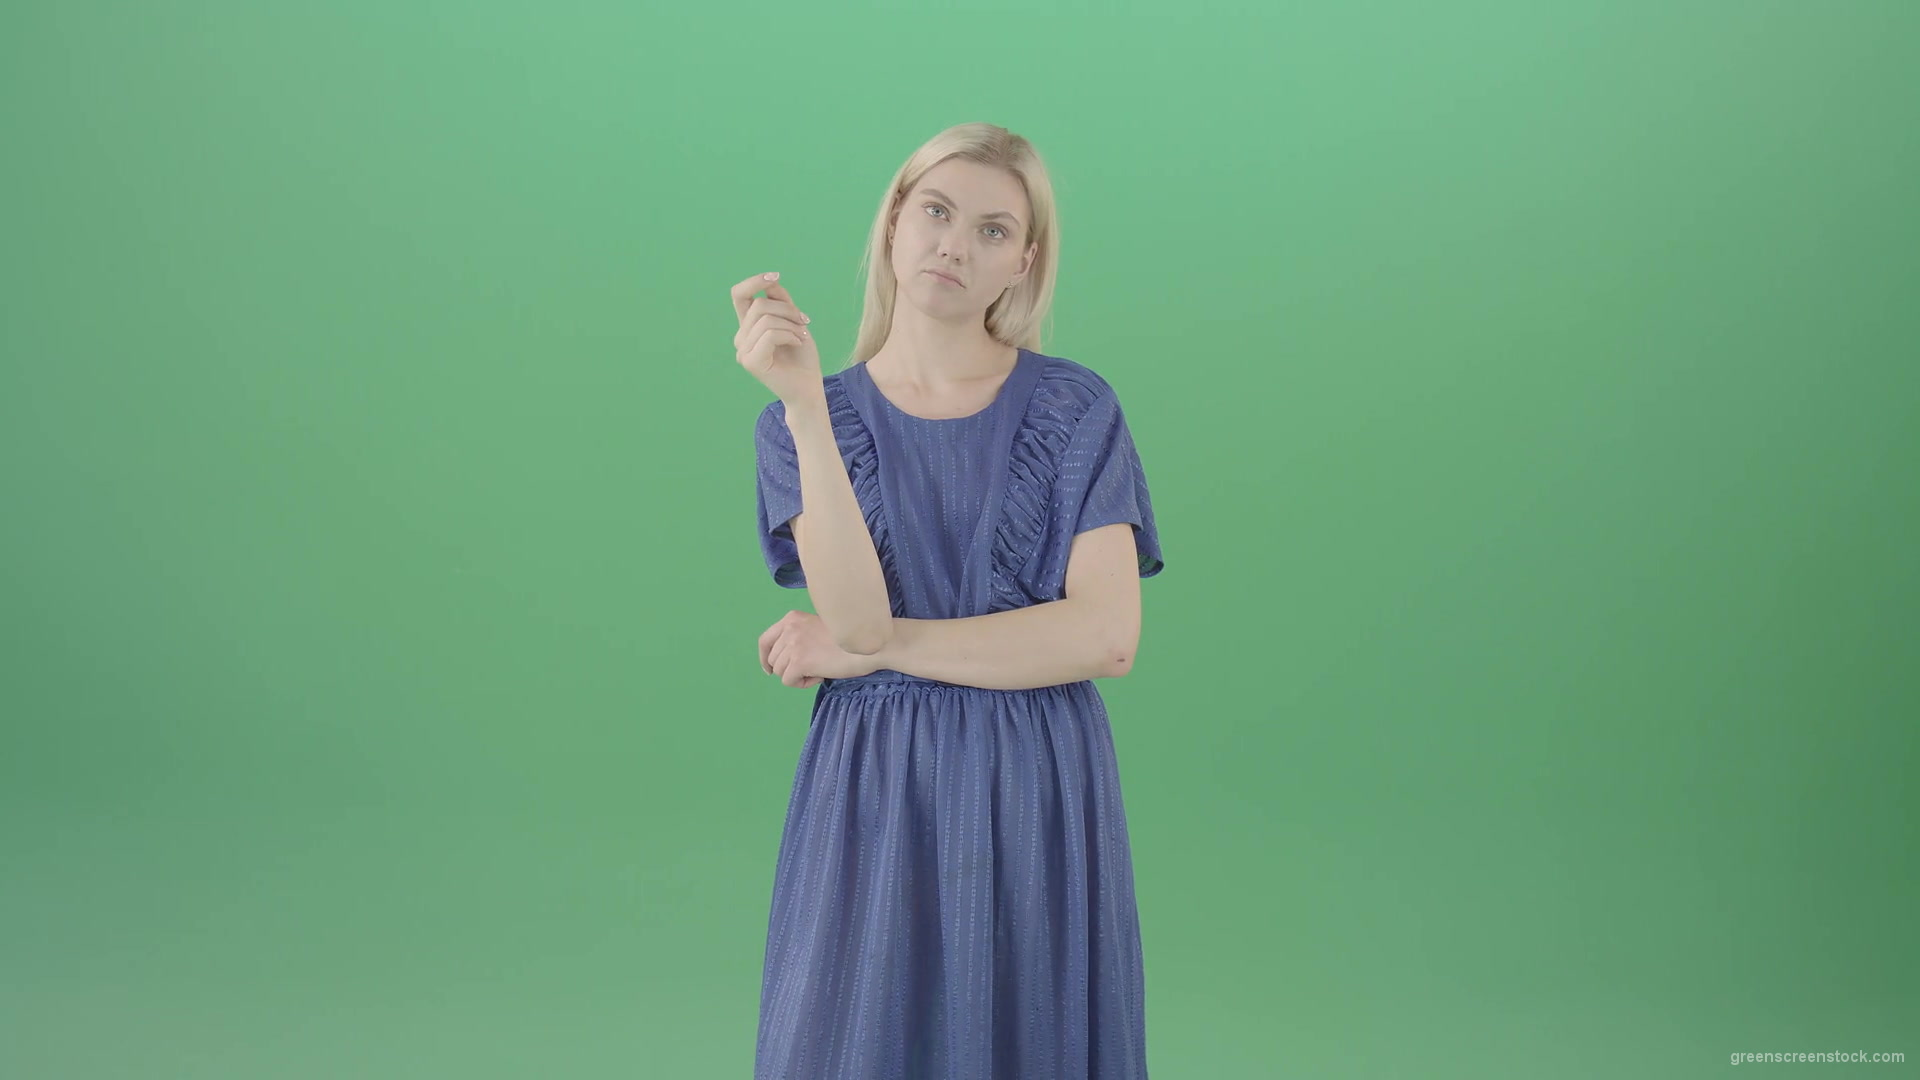 Boring-blonde-girl-in-blue-costume-can-not-find-virtual-products-on-touch-screen-isolated-on-green-background-4K-Video-Footage--1920_006 Green Screen Stock